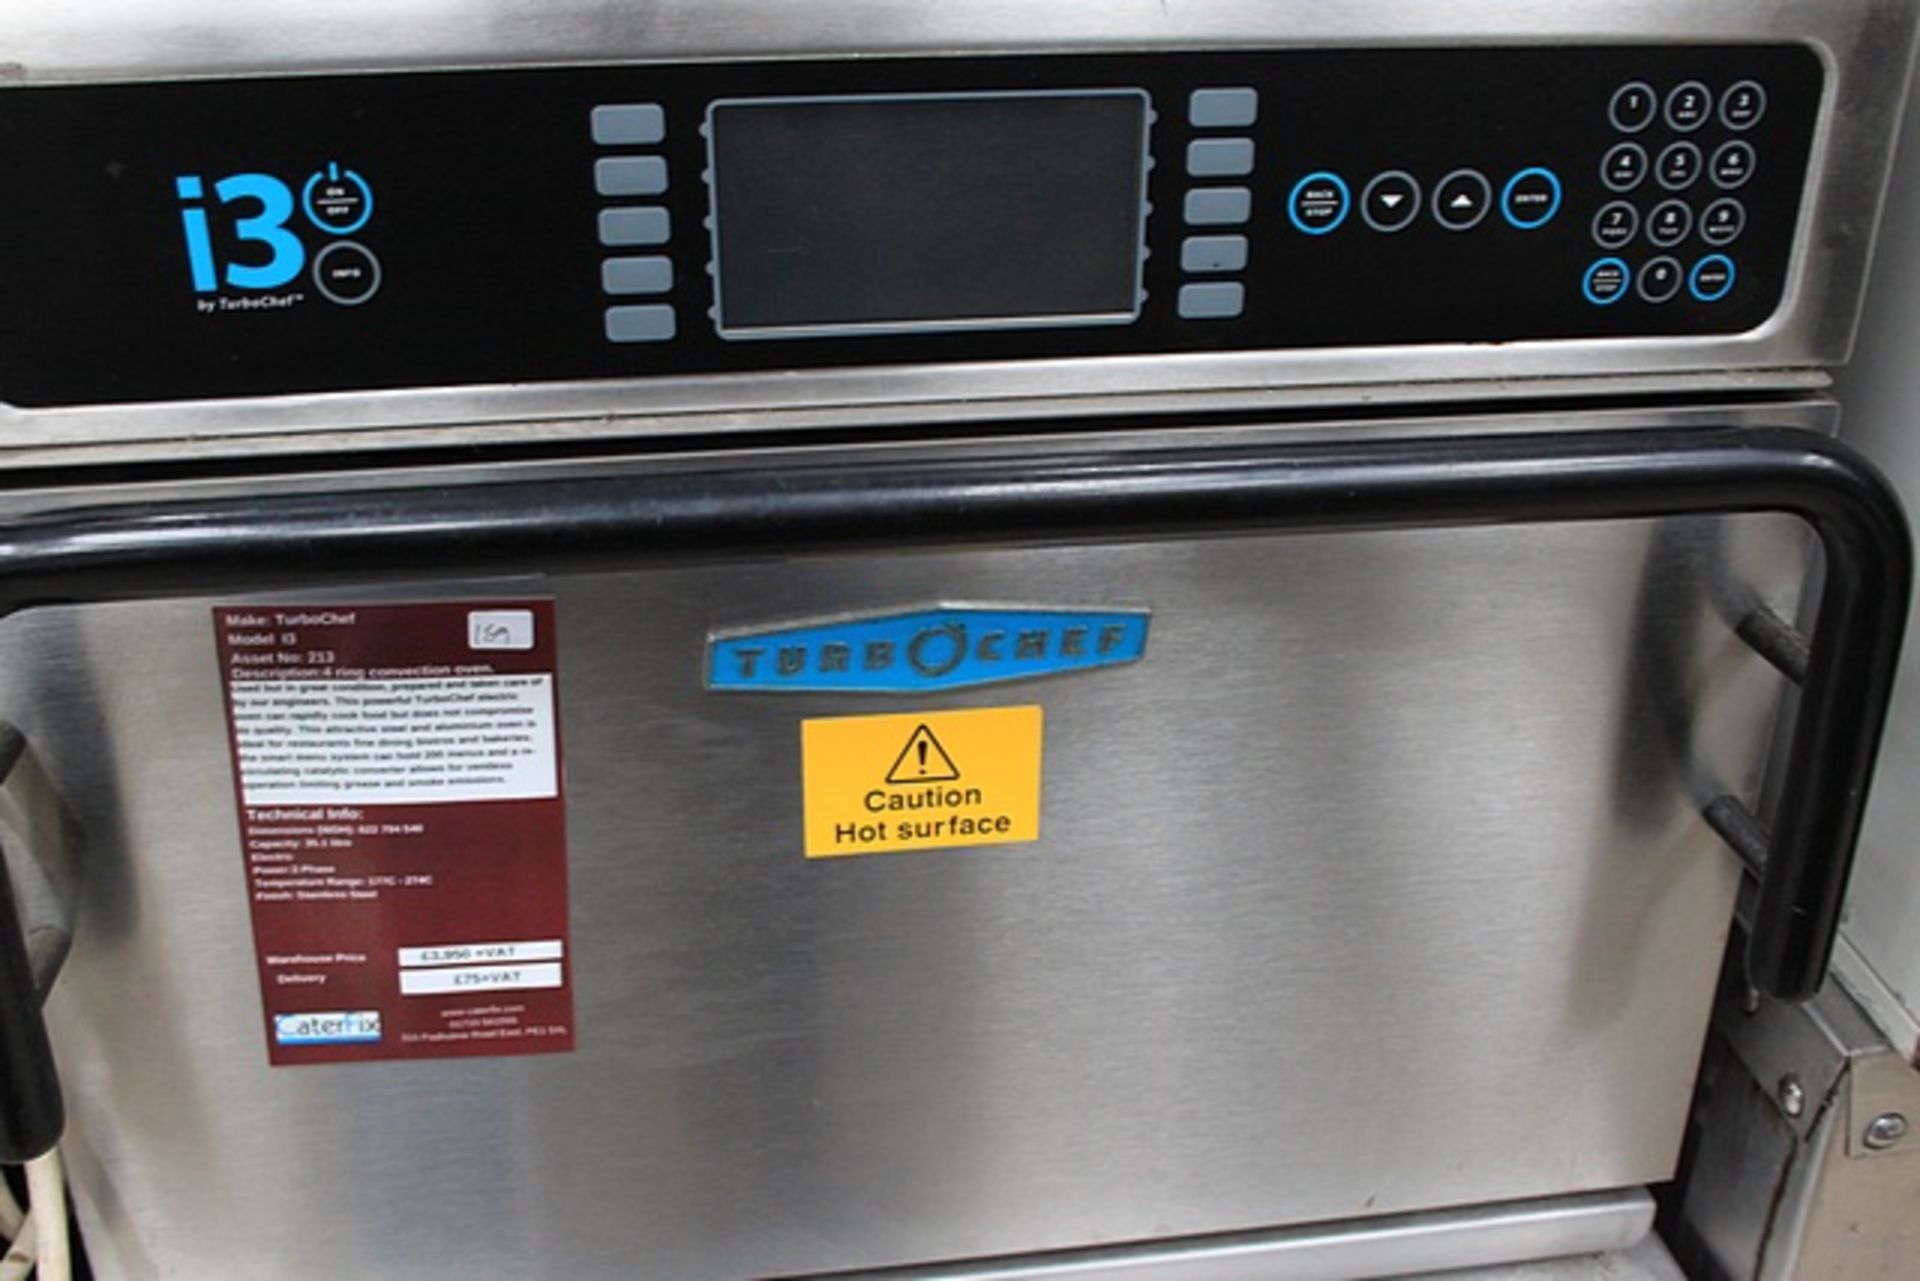 Blue Seal TurboChef Electric convection Oven Used but in great condition, prepared and taken care of